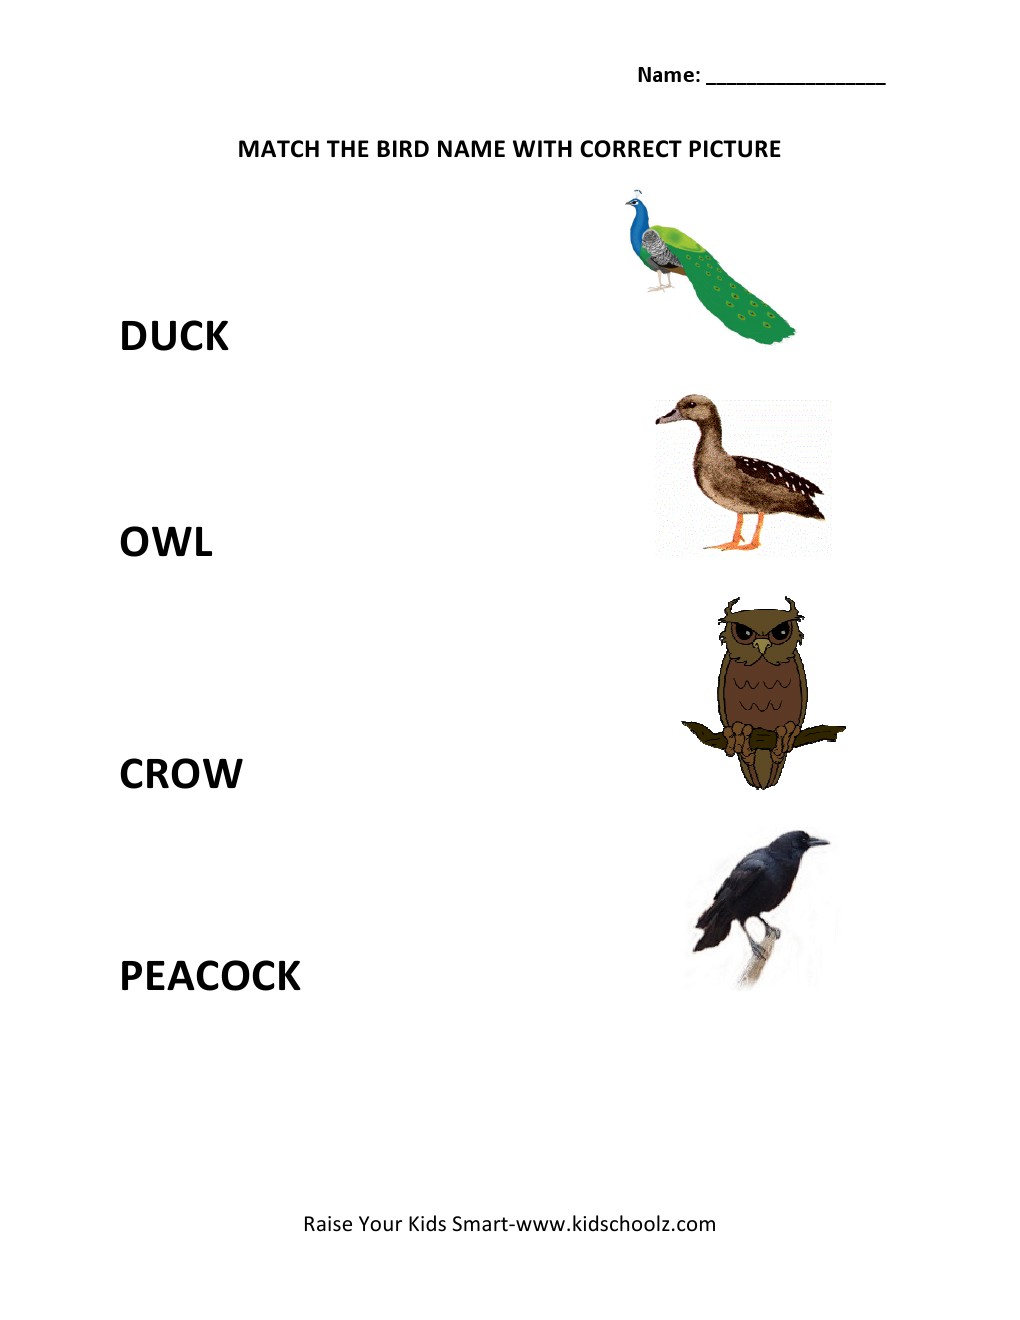 Picture To Name Matching Worksheets - Birds - Kidschoolz